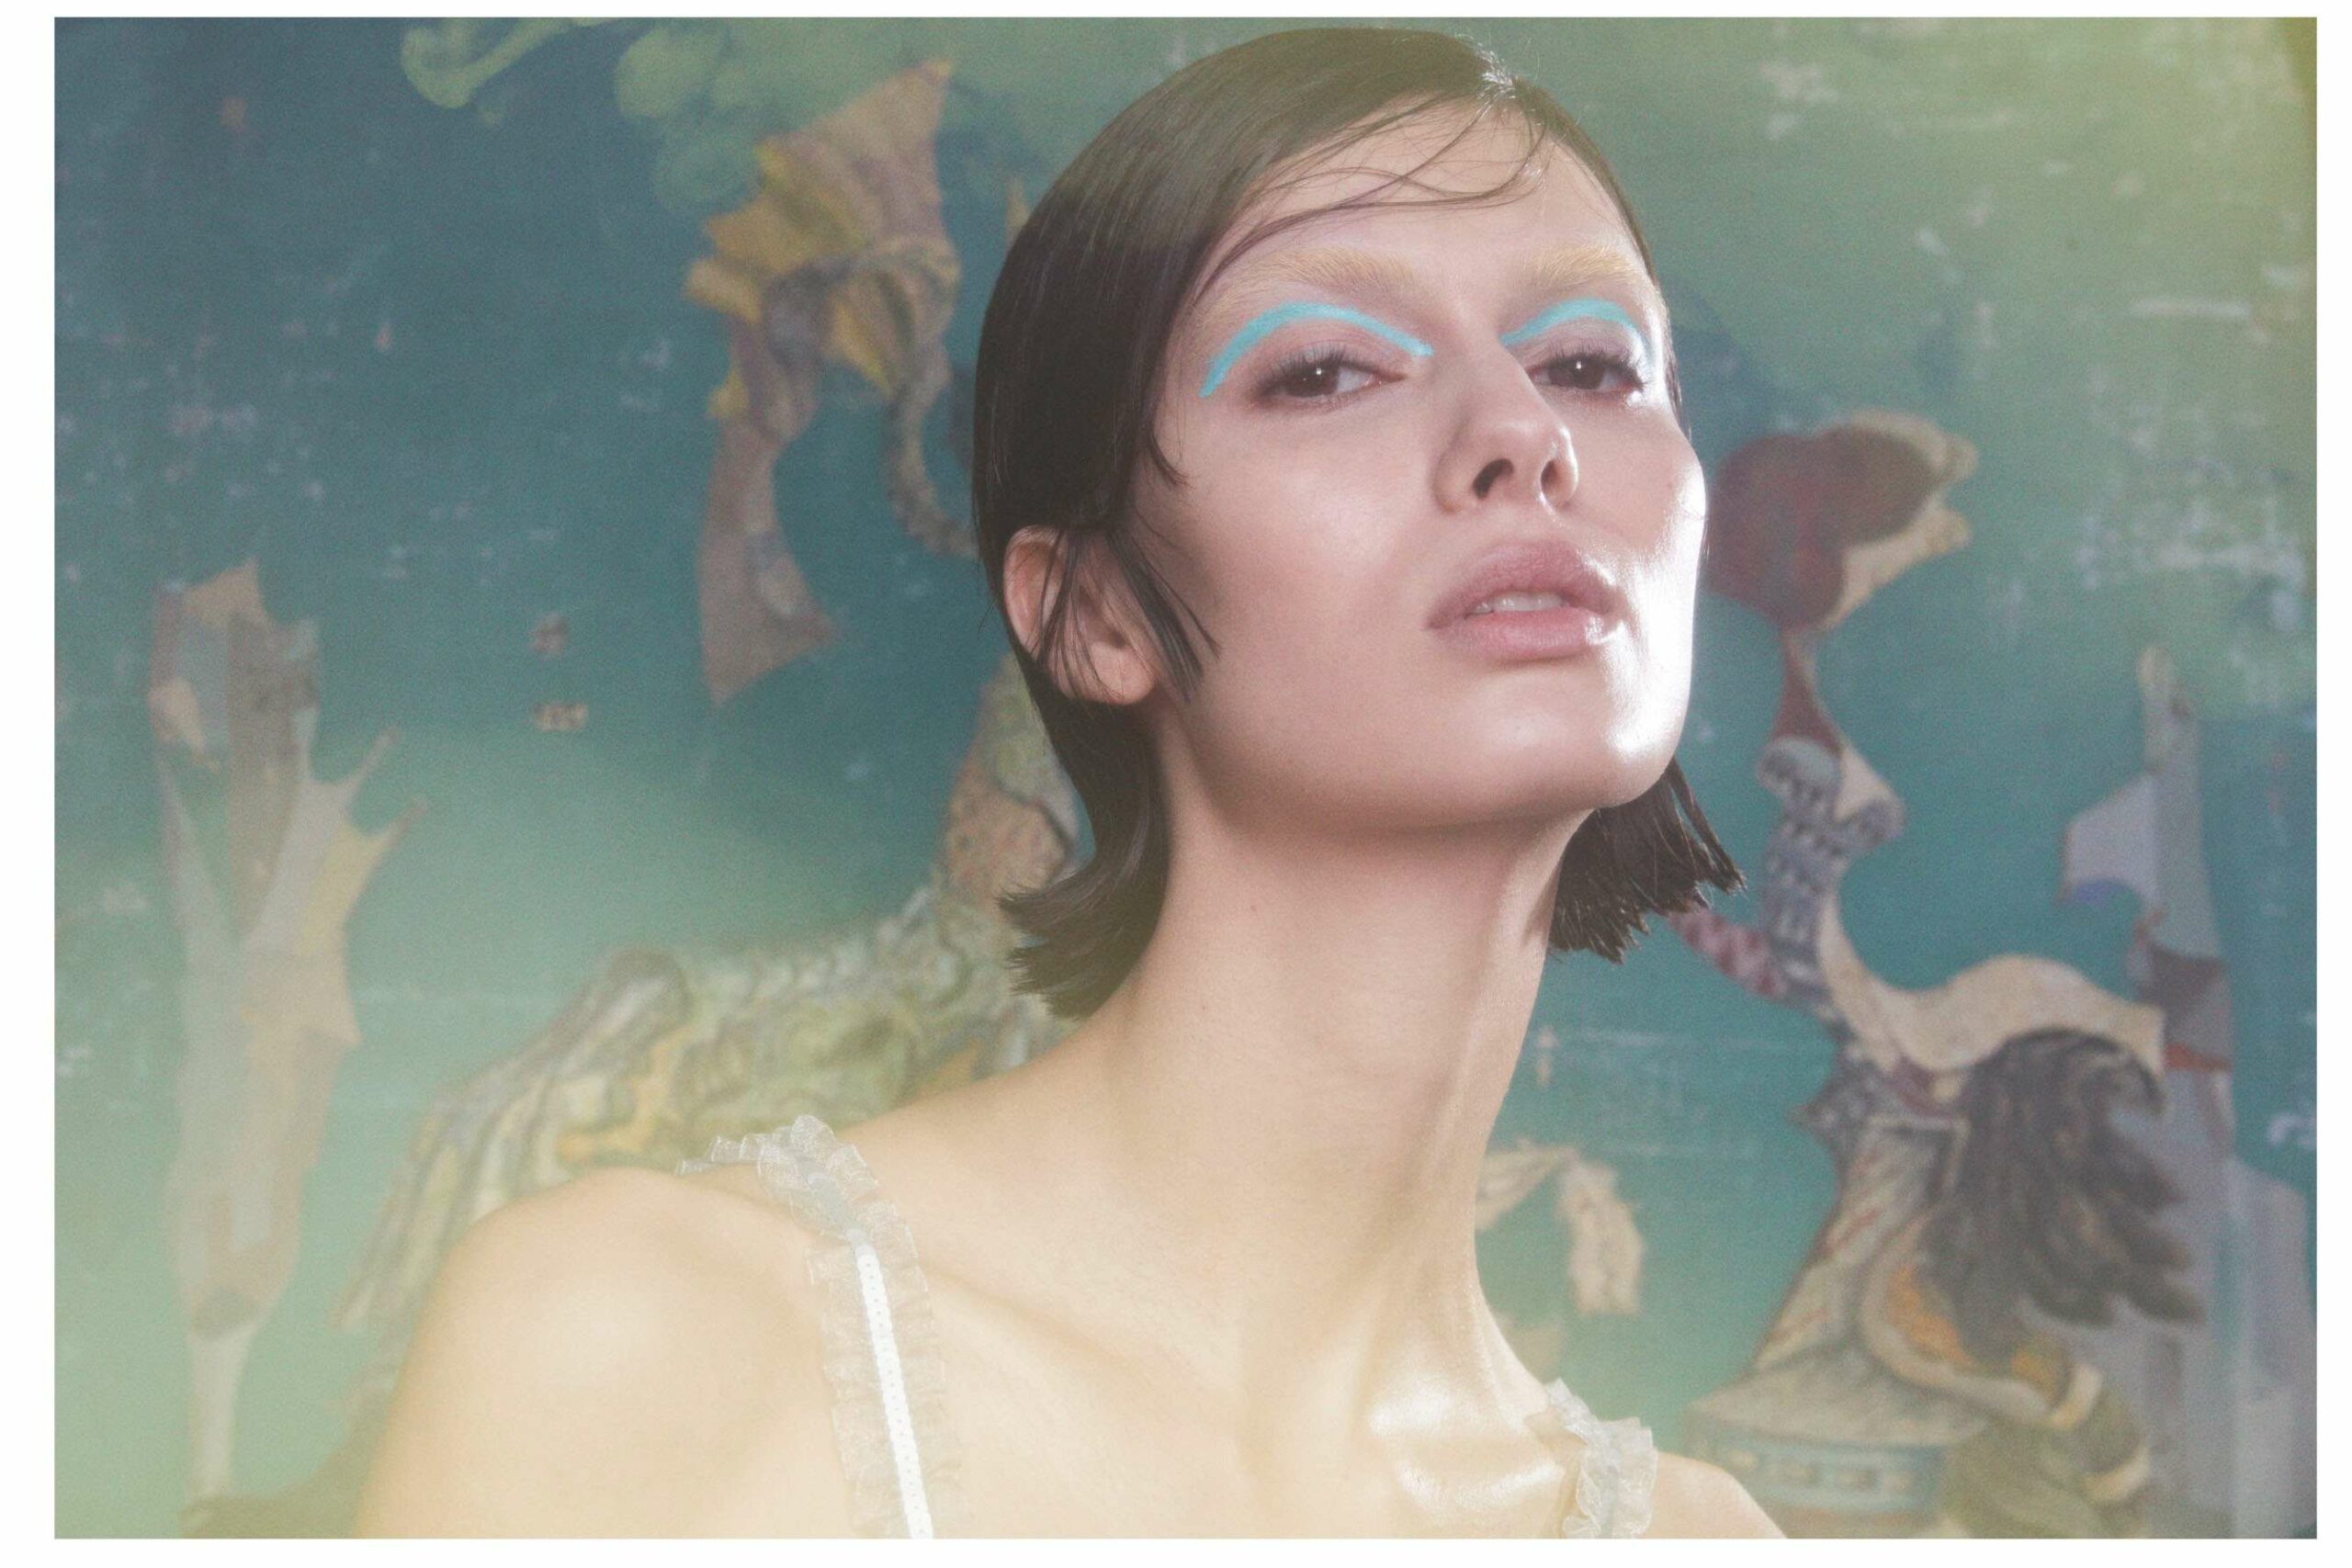 YOHANNES COUSY presents PRETTY AS A PAINTING for MIRROR MIRROR MAG with Coco Amardeil | CONSULTING - CREATIVE PRODUCTION